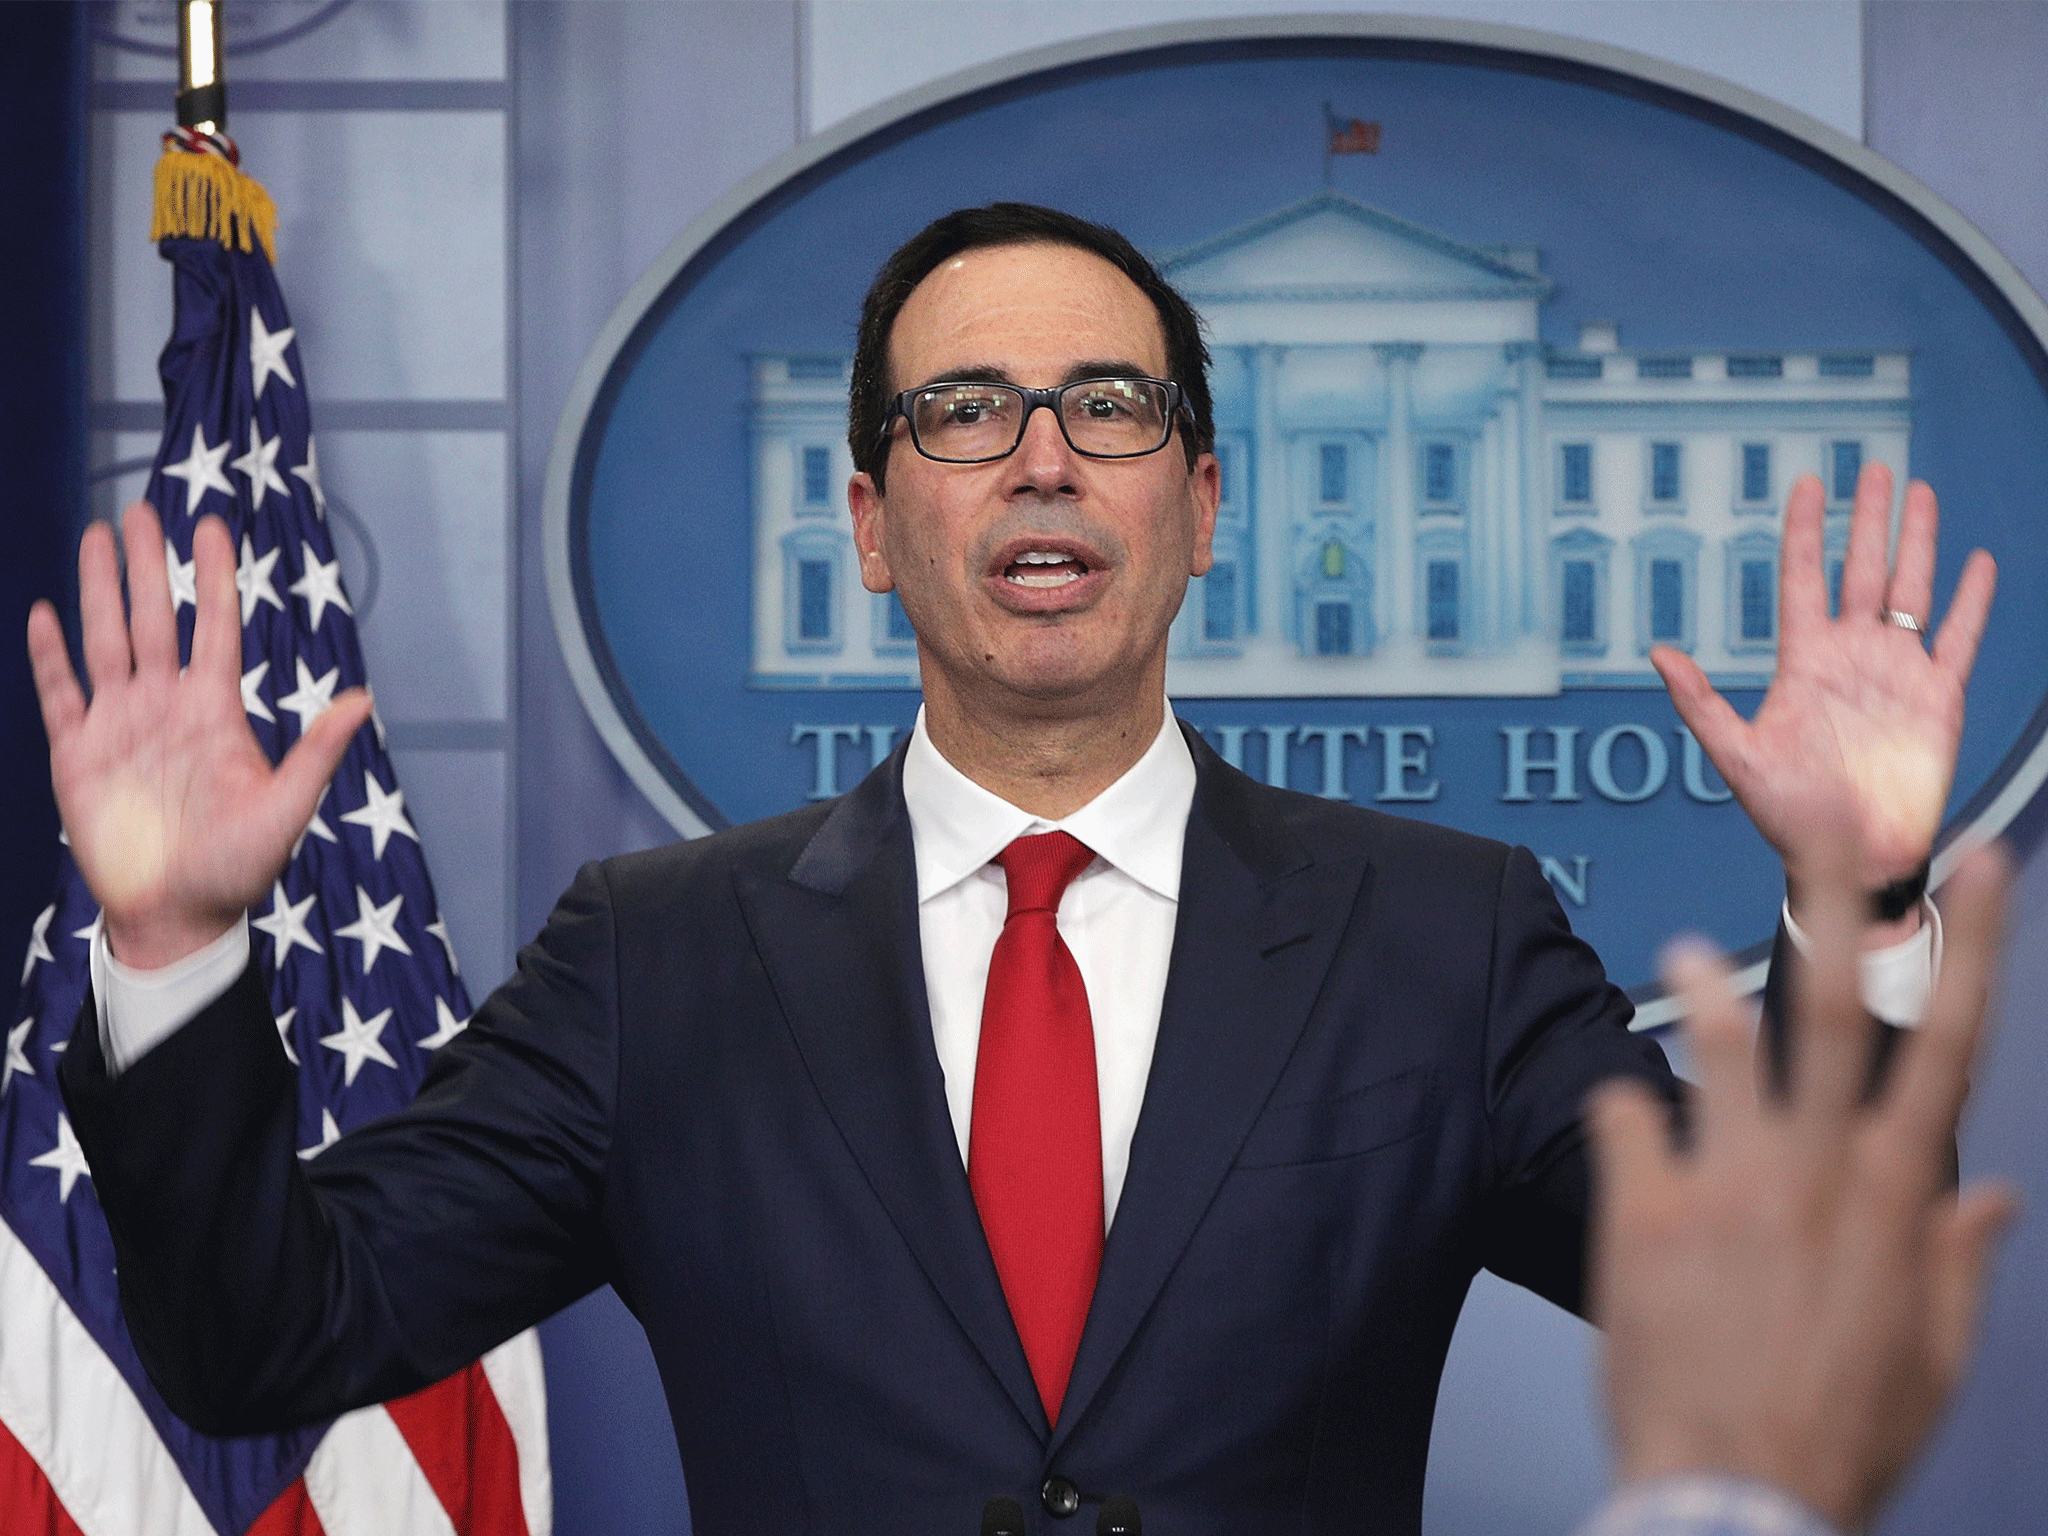 The parcel sent to Steven Mnuchin's Los Angeles home sparked a bomb scare